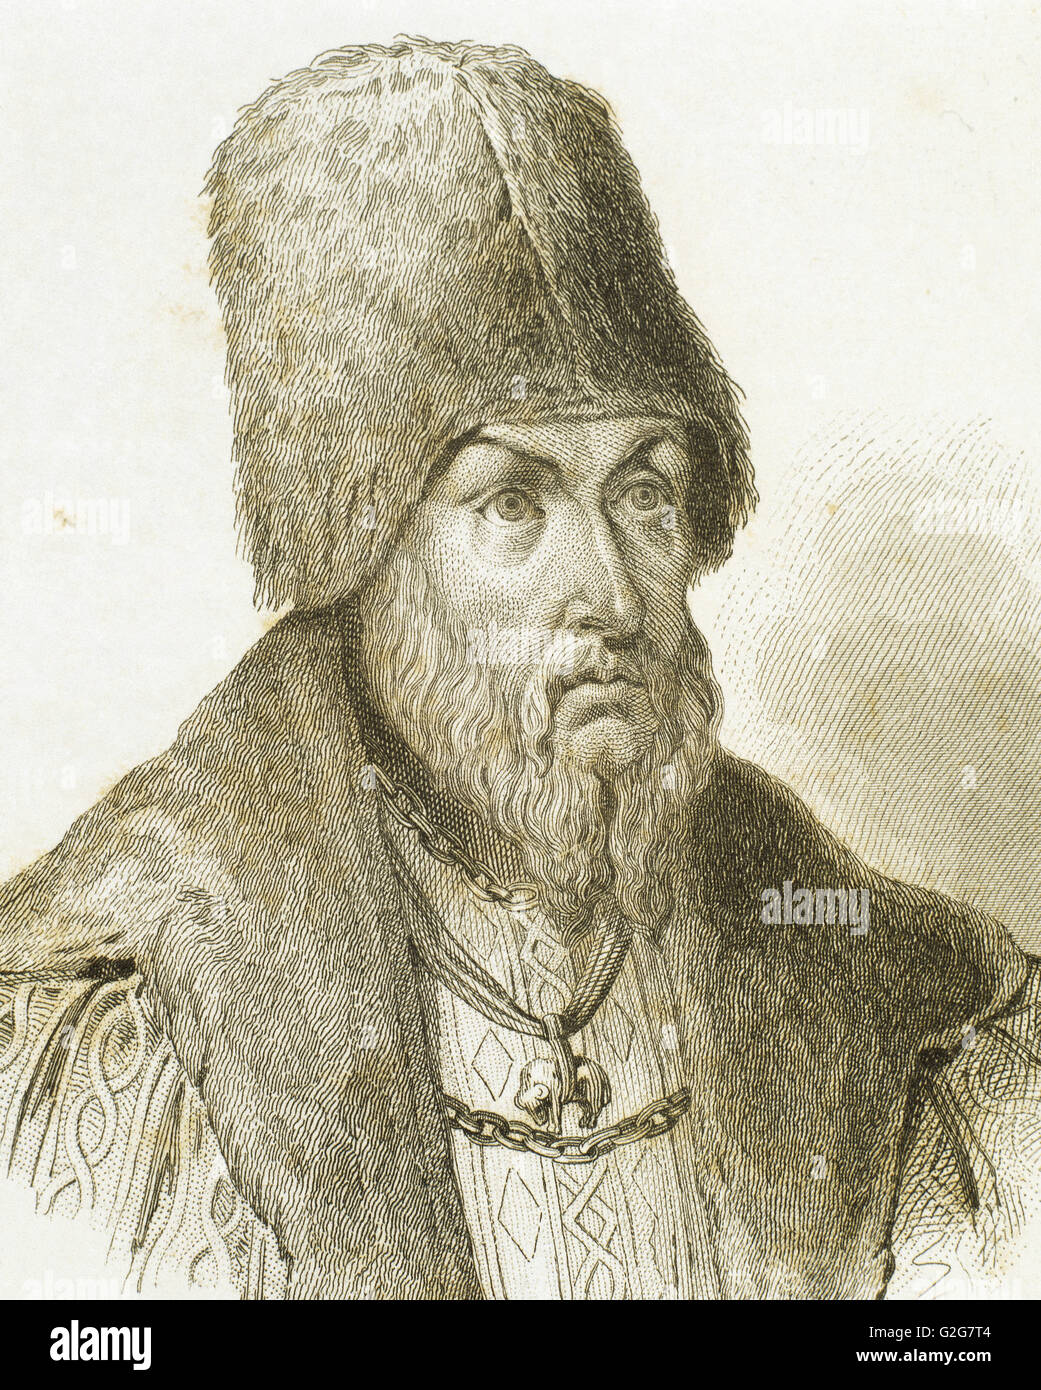 Sigismund I the Old (1467-1548). King of Poland and Grand Duke of Lithuania. Portrait. Engraving, 19th century. Stock Photo